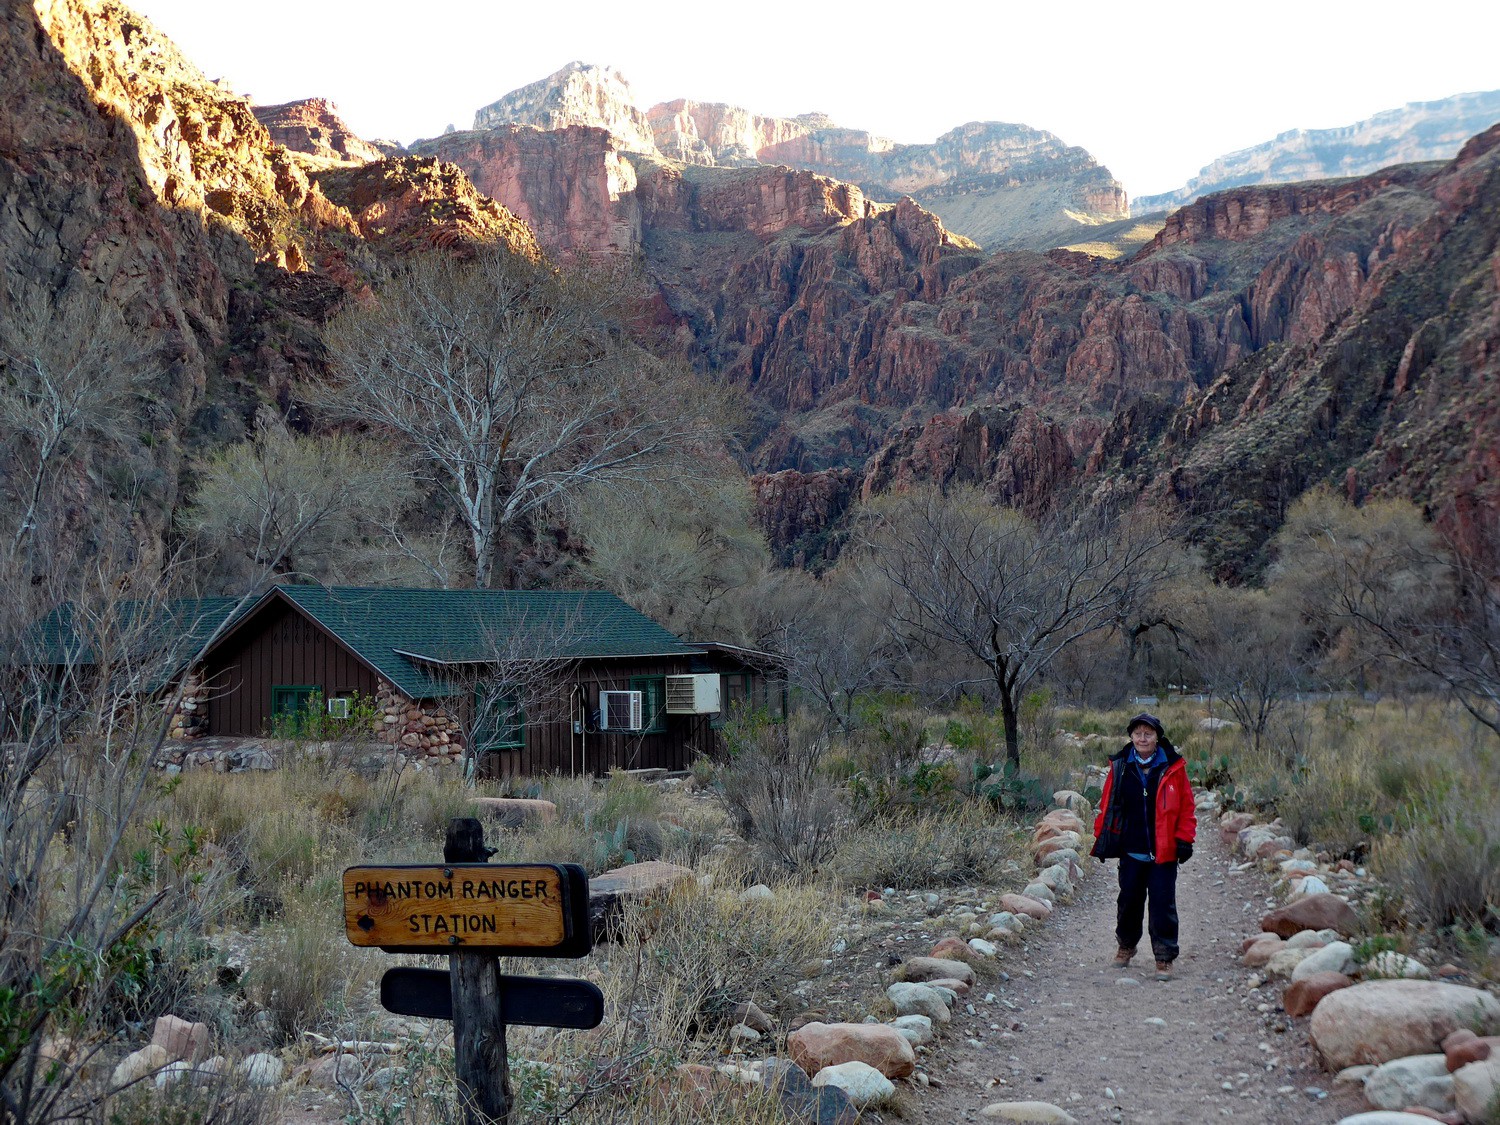 Marion close to Phantom Ranch on the bottom of Grand Canyon